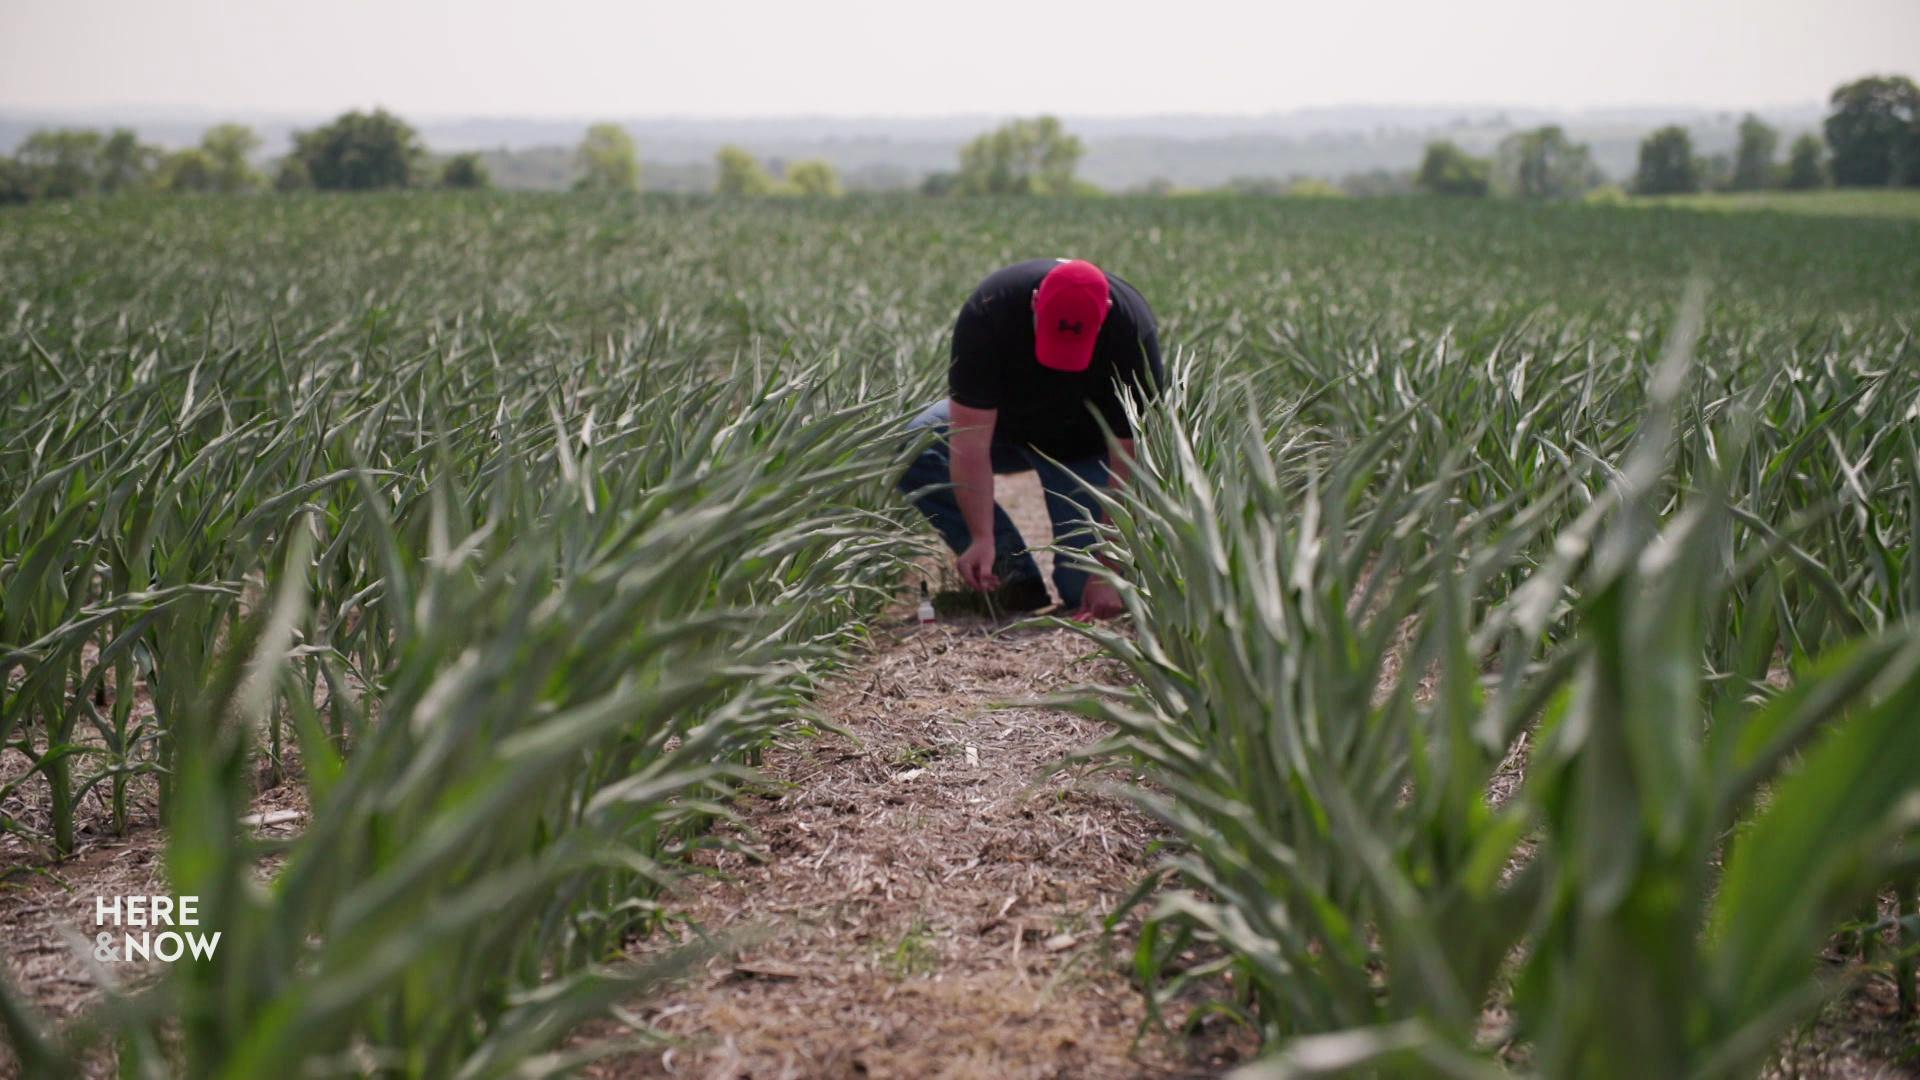 A still image shows a man kneeling down and checking the dirt between rows of green crops in a field.